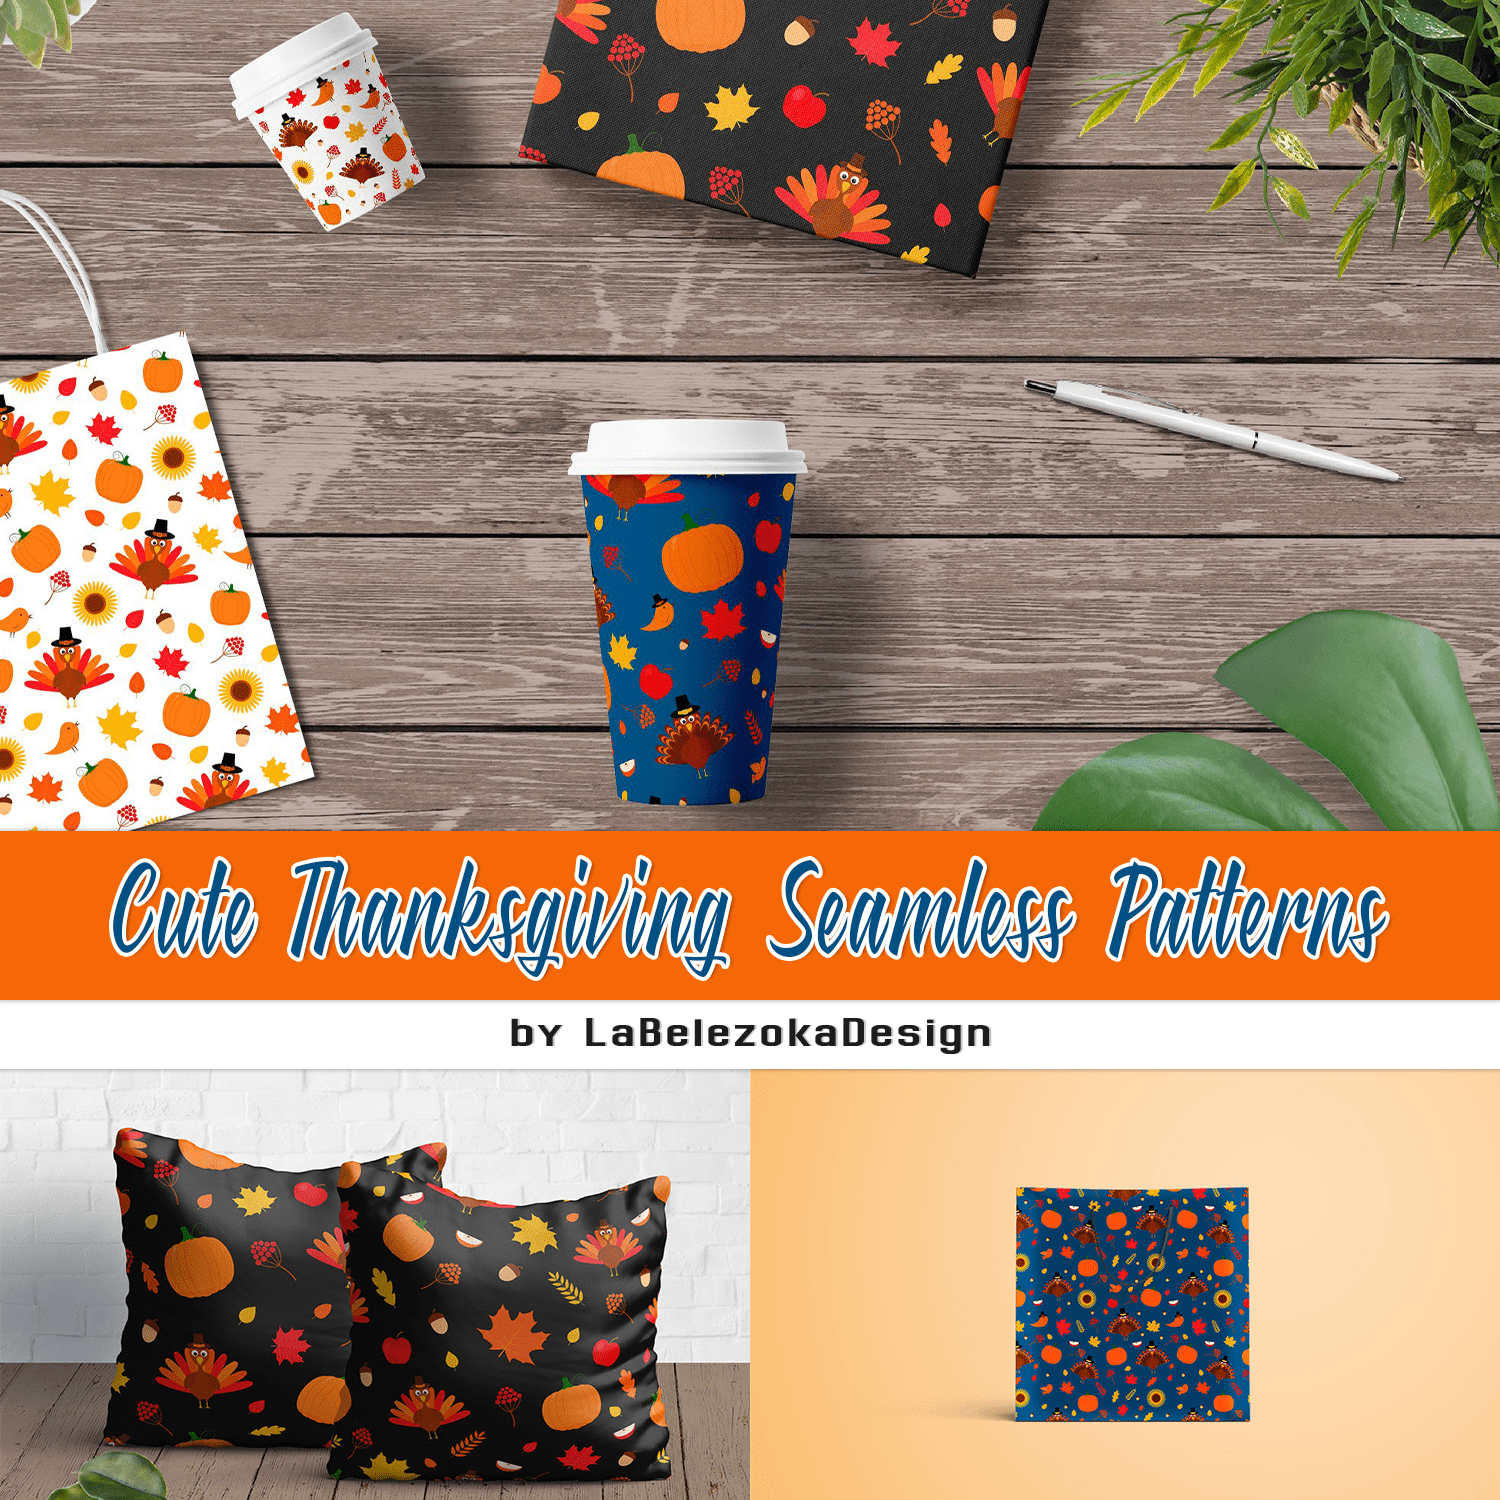 Cute Thanksgiving Seamless Patterns cover.